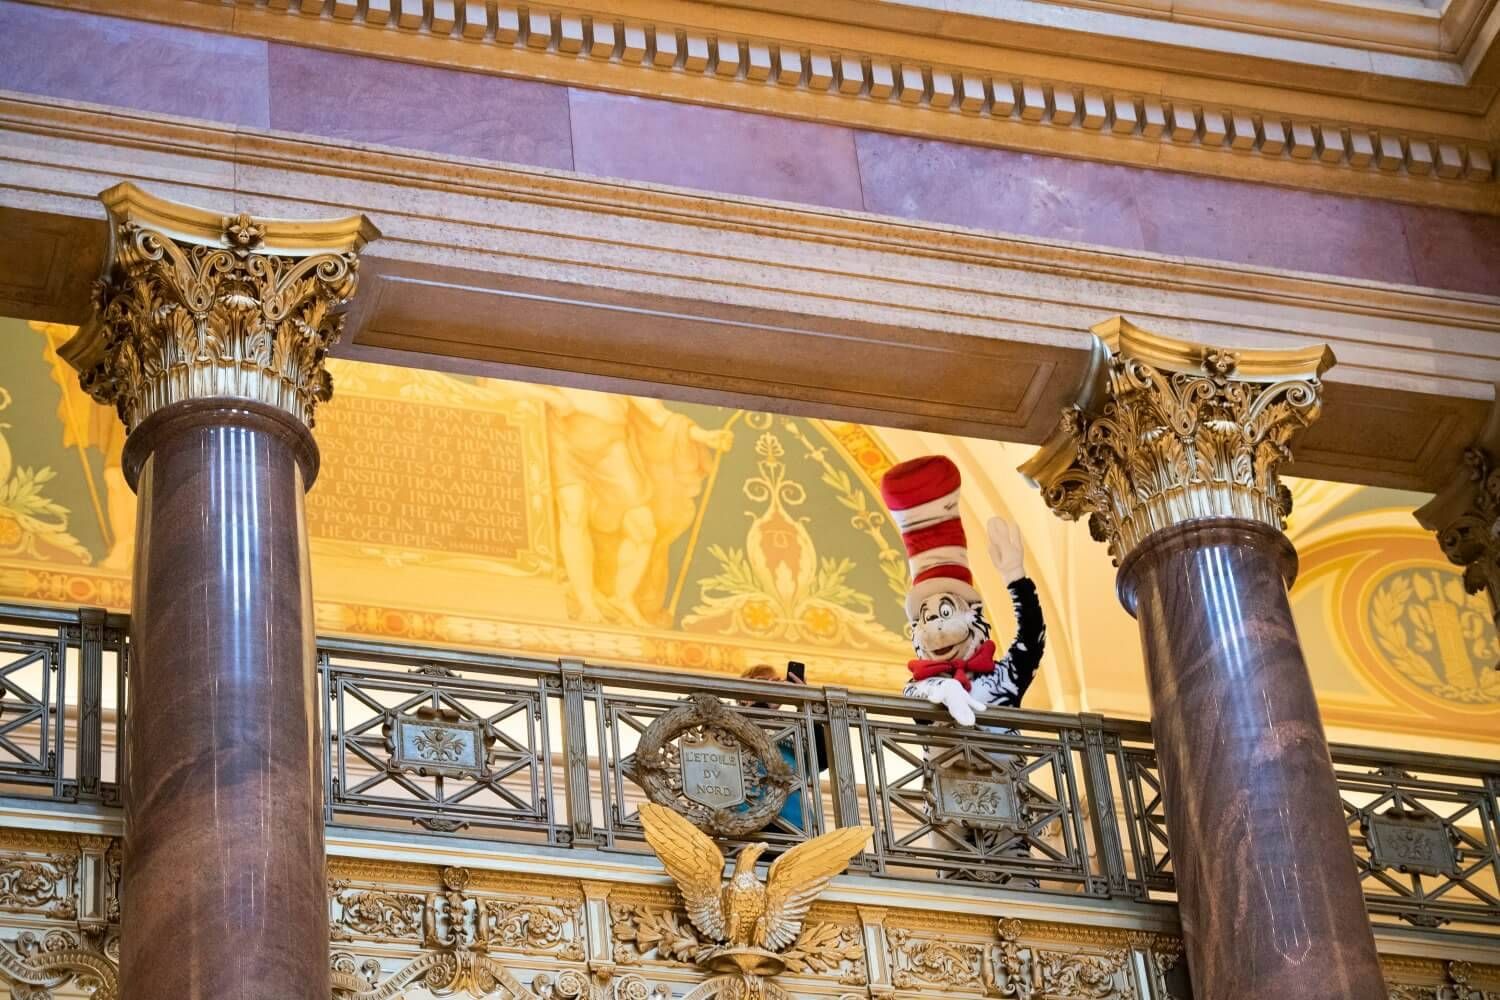 Cat in the Hat checked out our Good Neighbor Program from above.